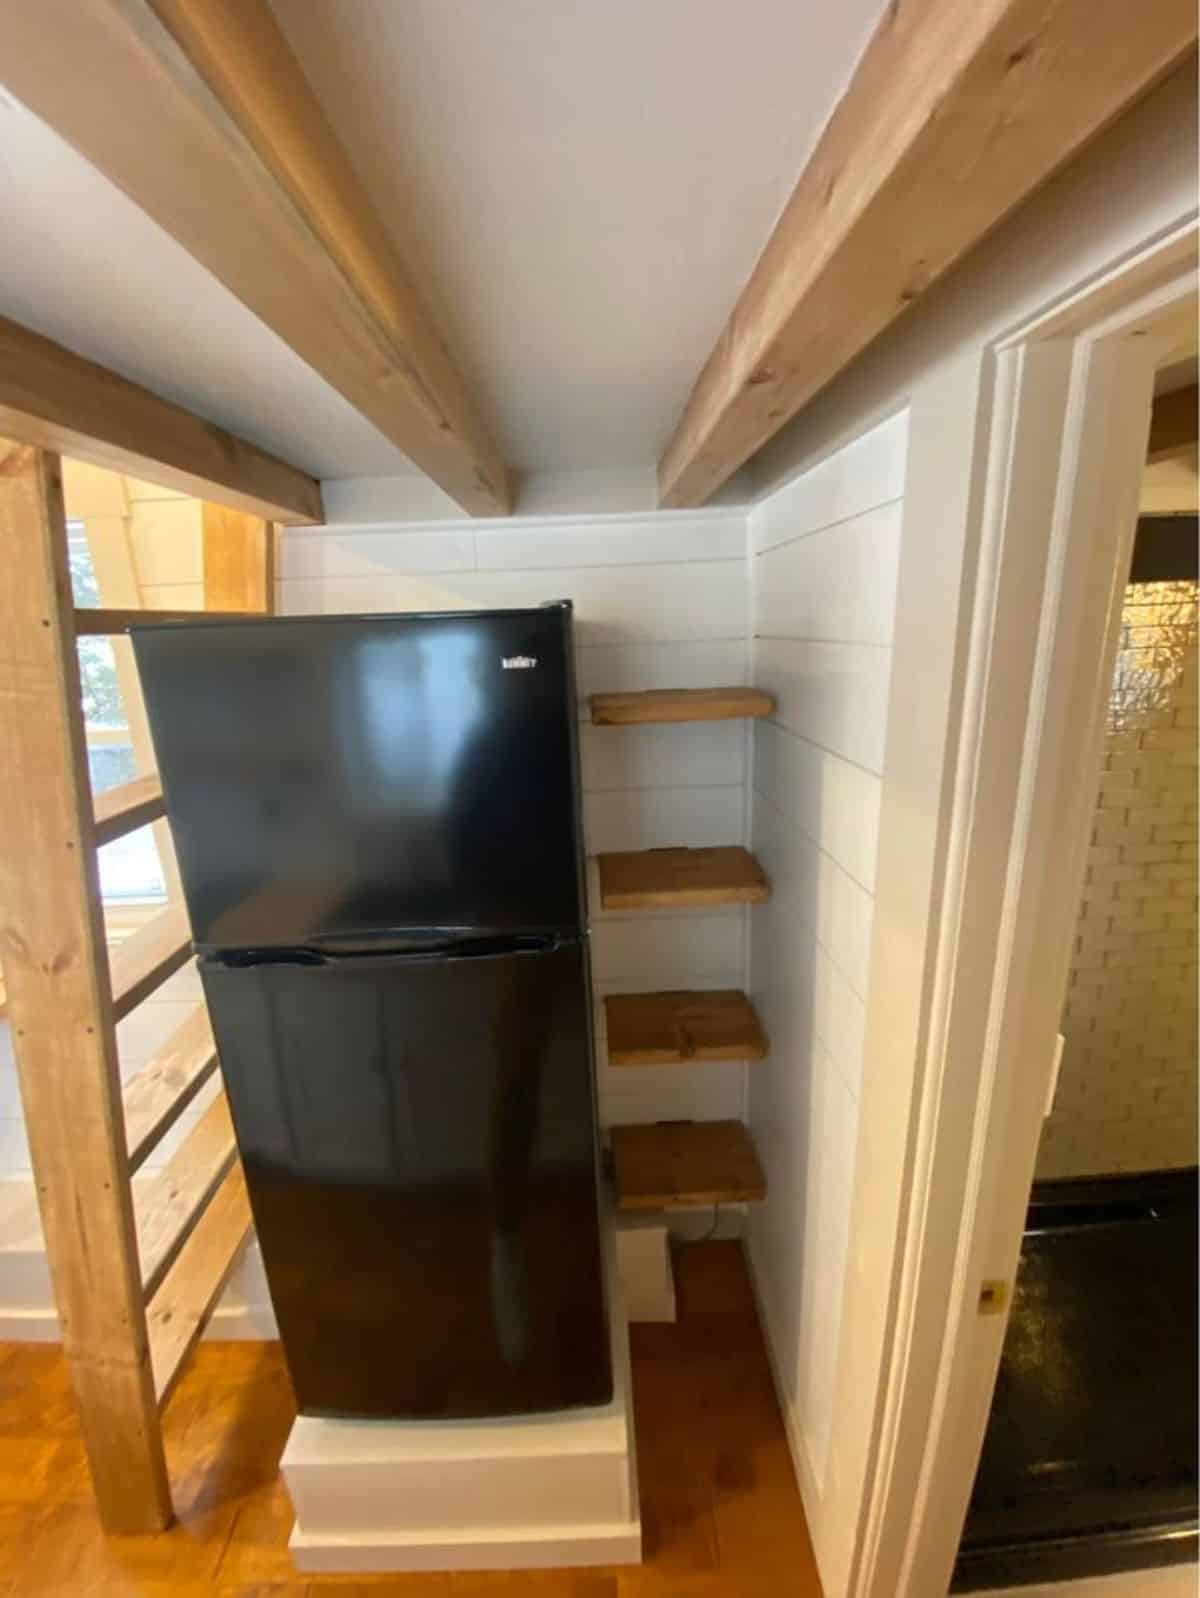 separate space for double door refrigerator and small racks for pantry things